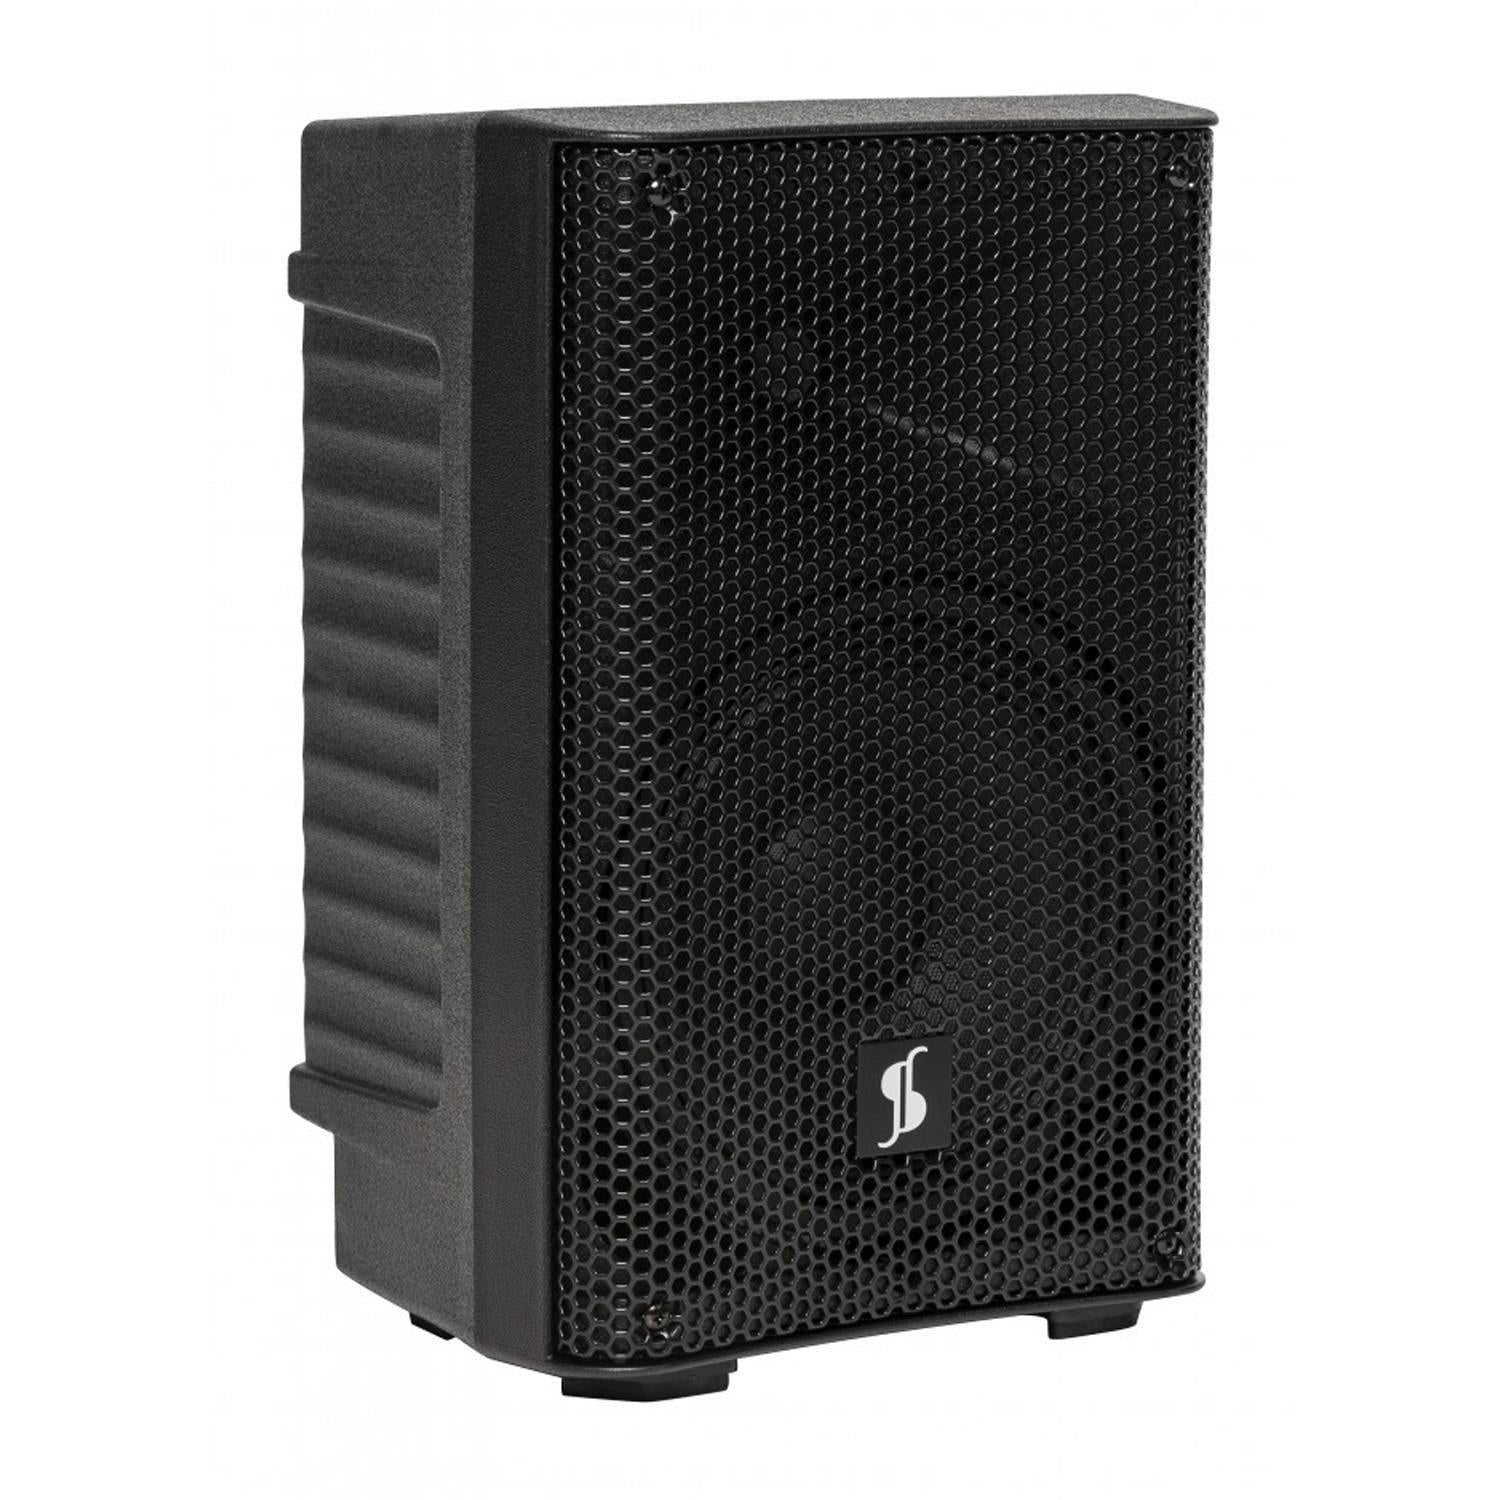 Stagg AS8 8" 250w Active Speaker with Bluetooth - DY Pro Audio